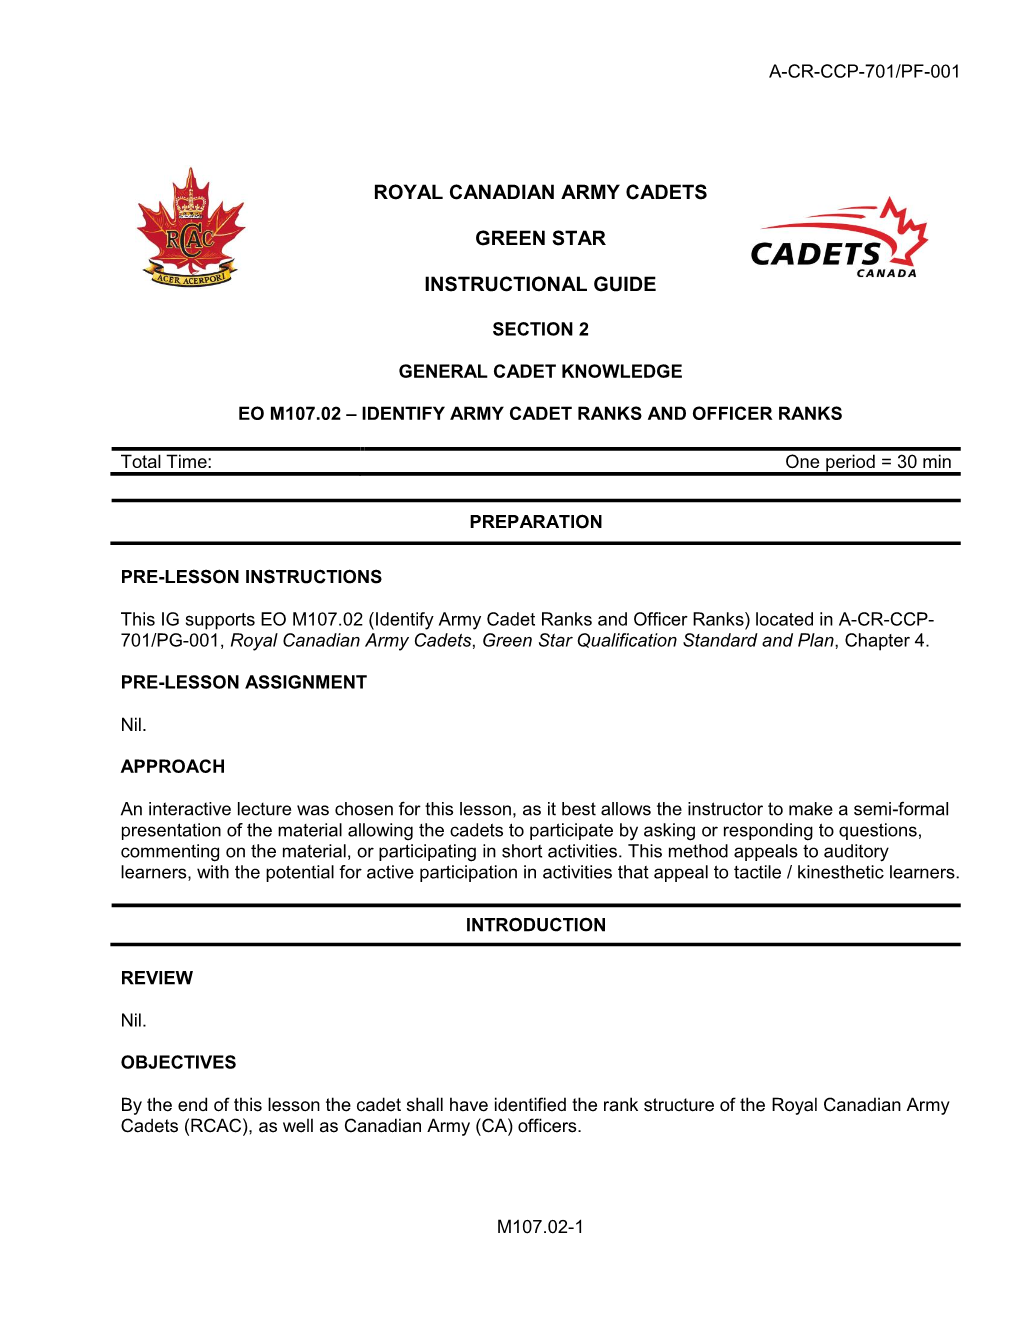 Royal Canadian Army Cadets Green Star Instructional